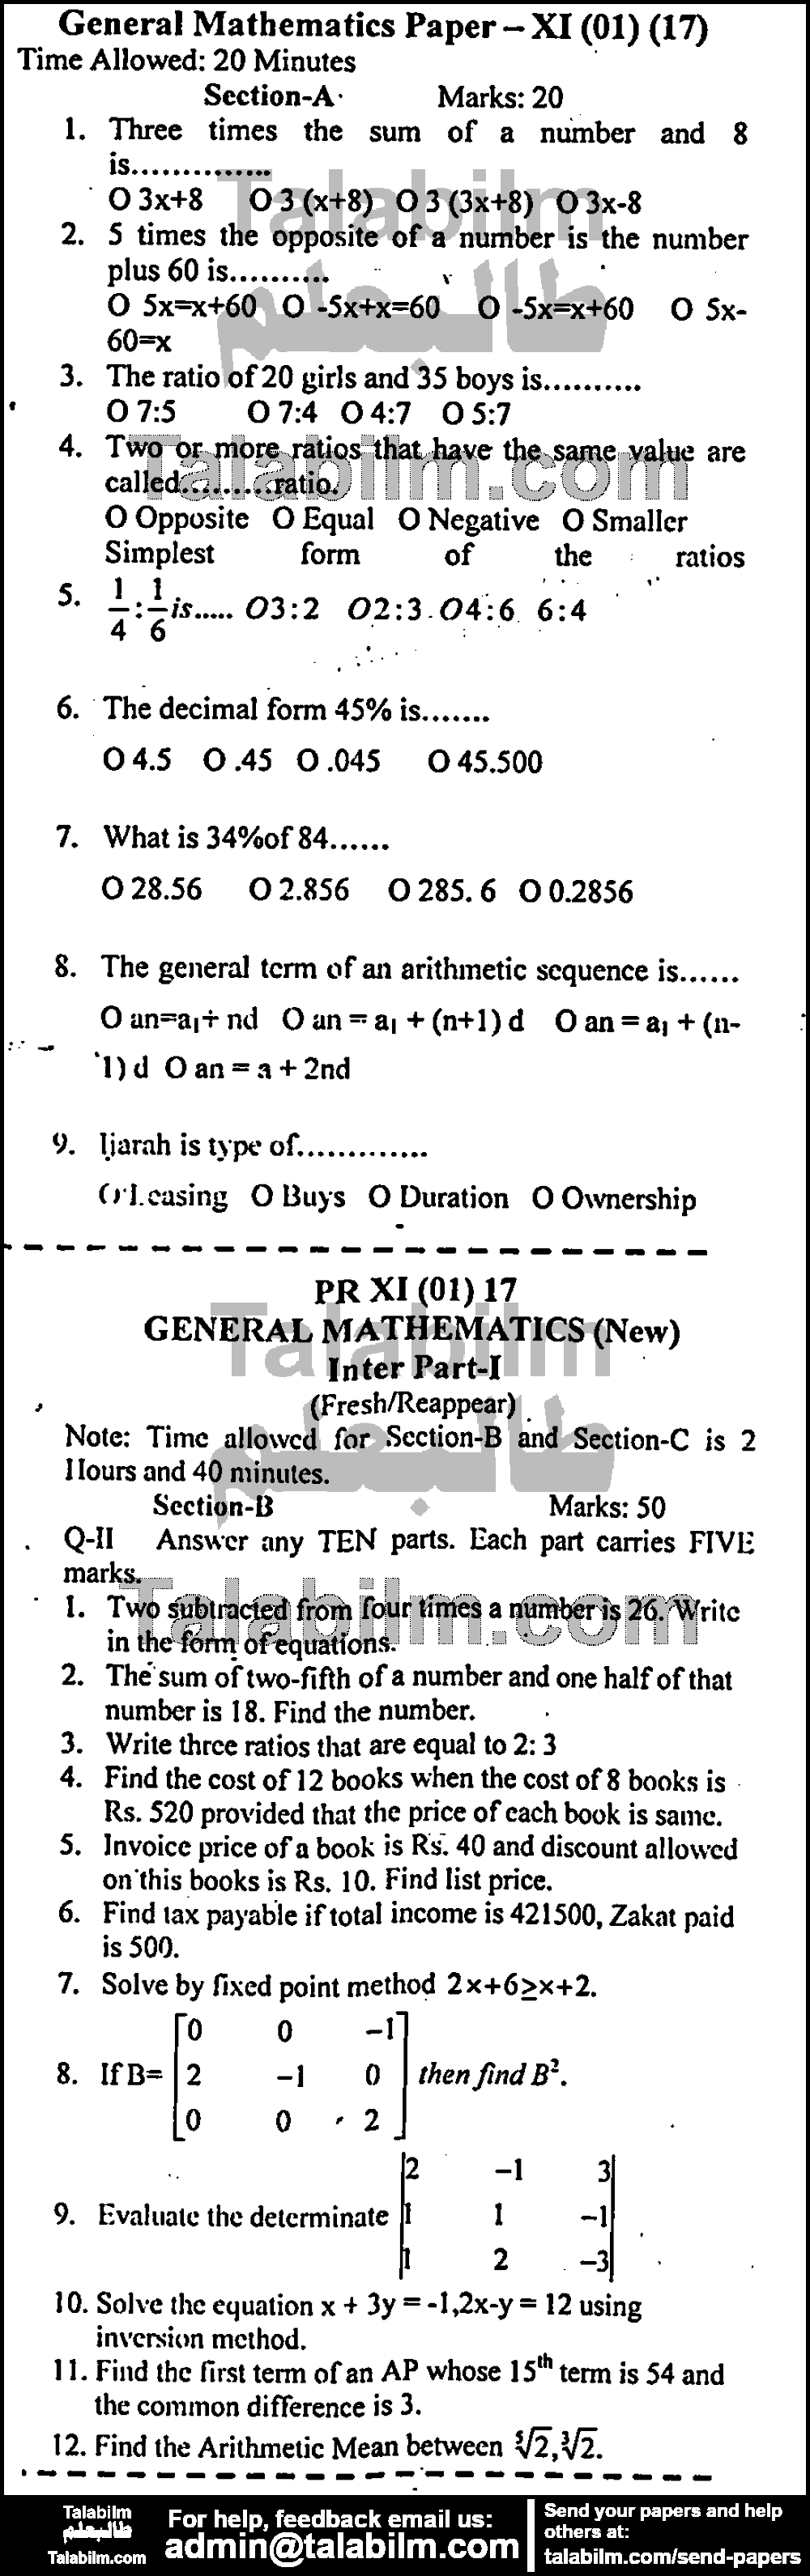 Math 0 past paper for Group-I 2017